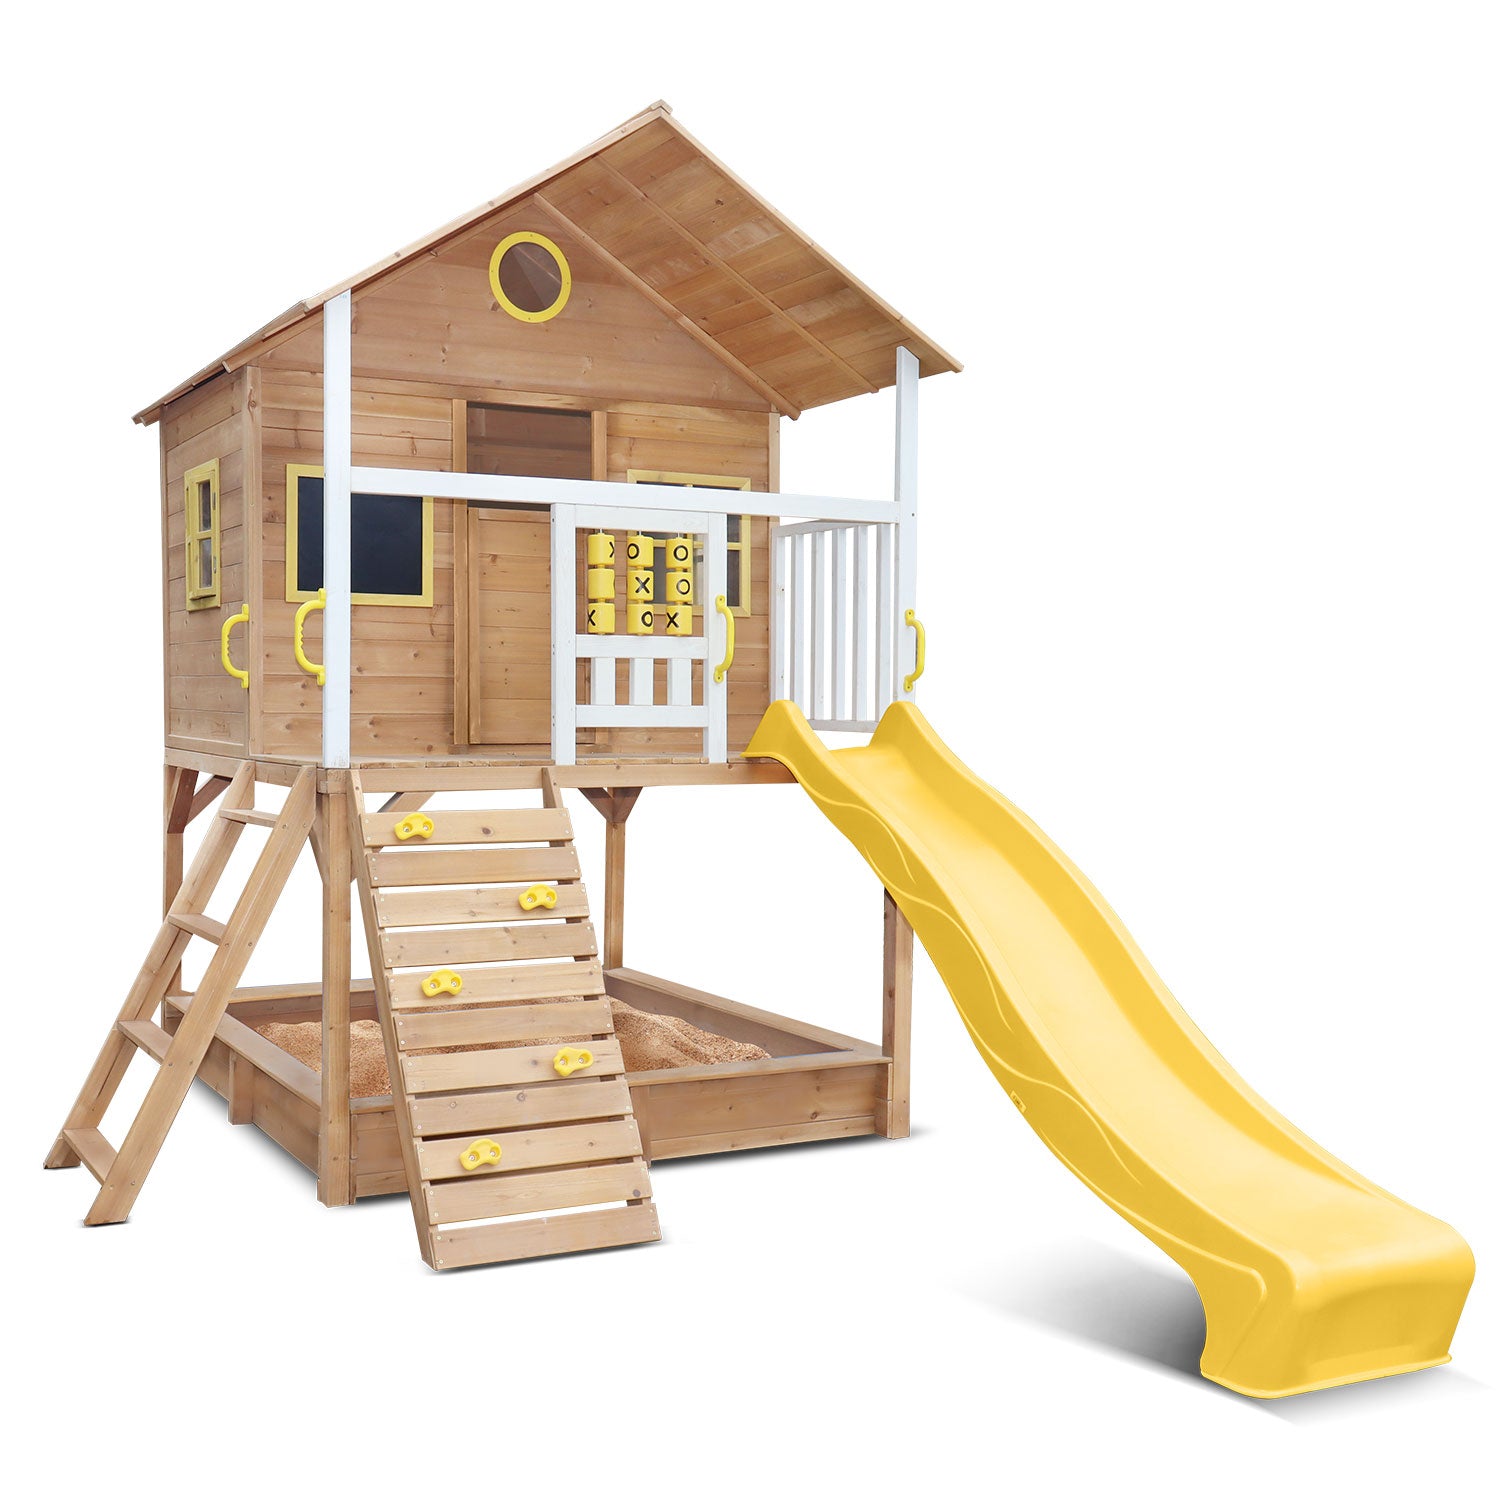 Elevated cubby house warrigal lifespan kids